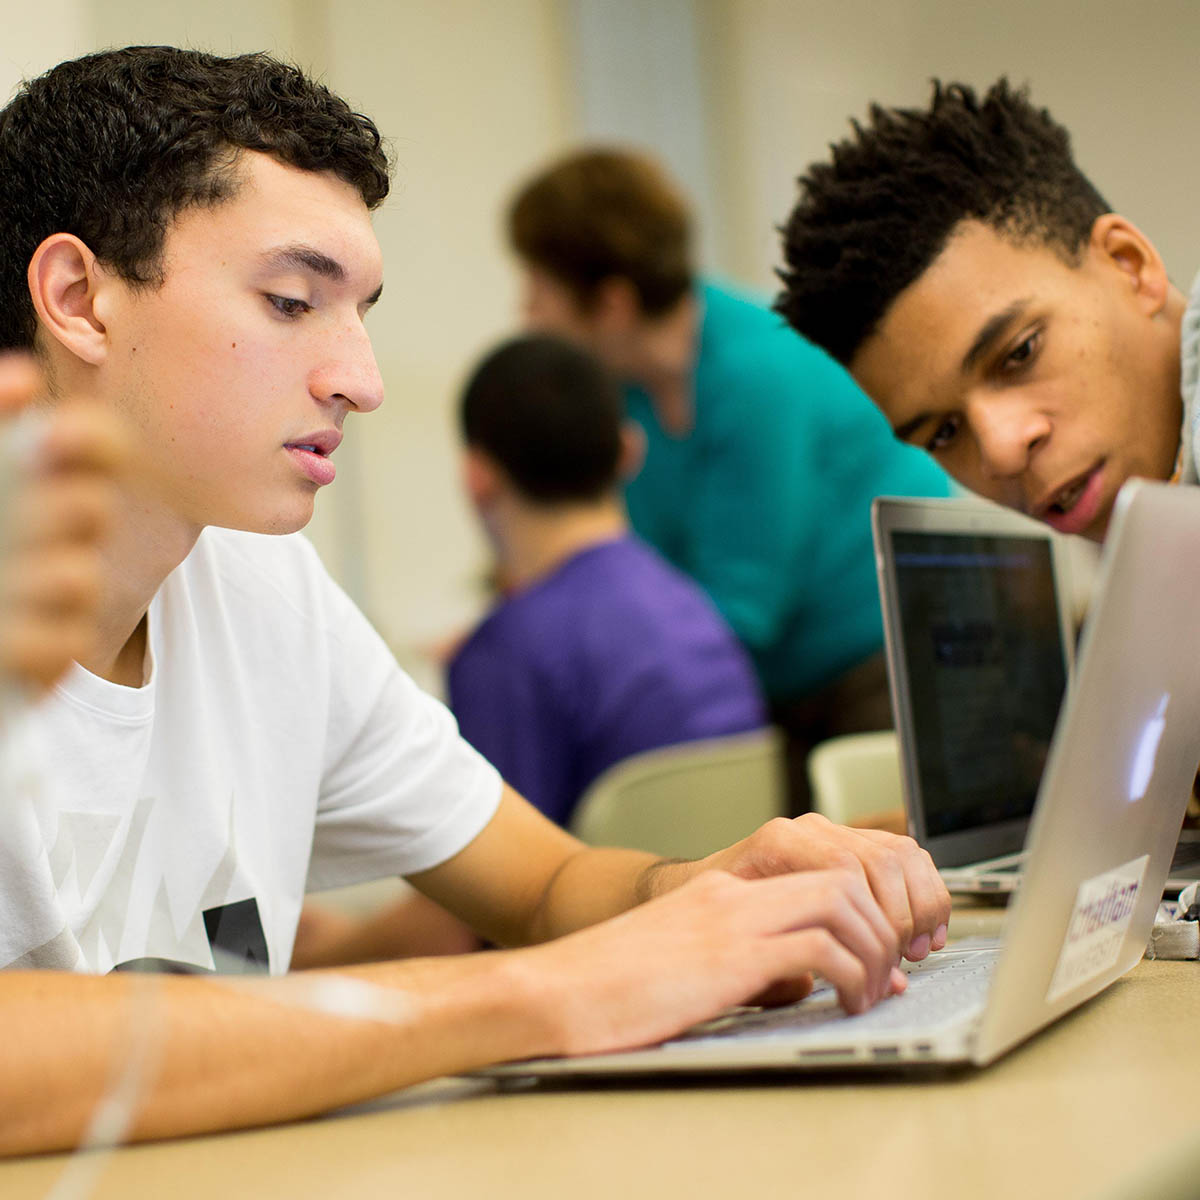 Photo of students working on a laptop together in the classroom